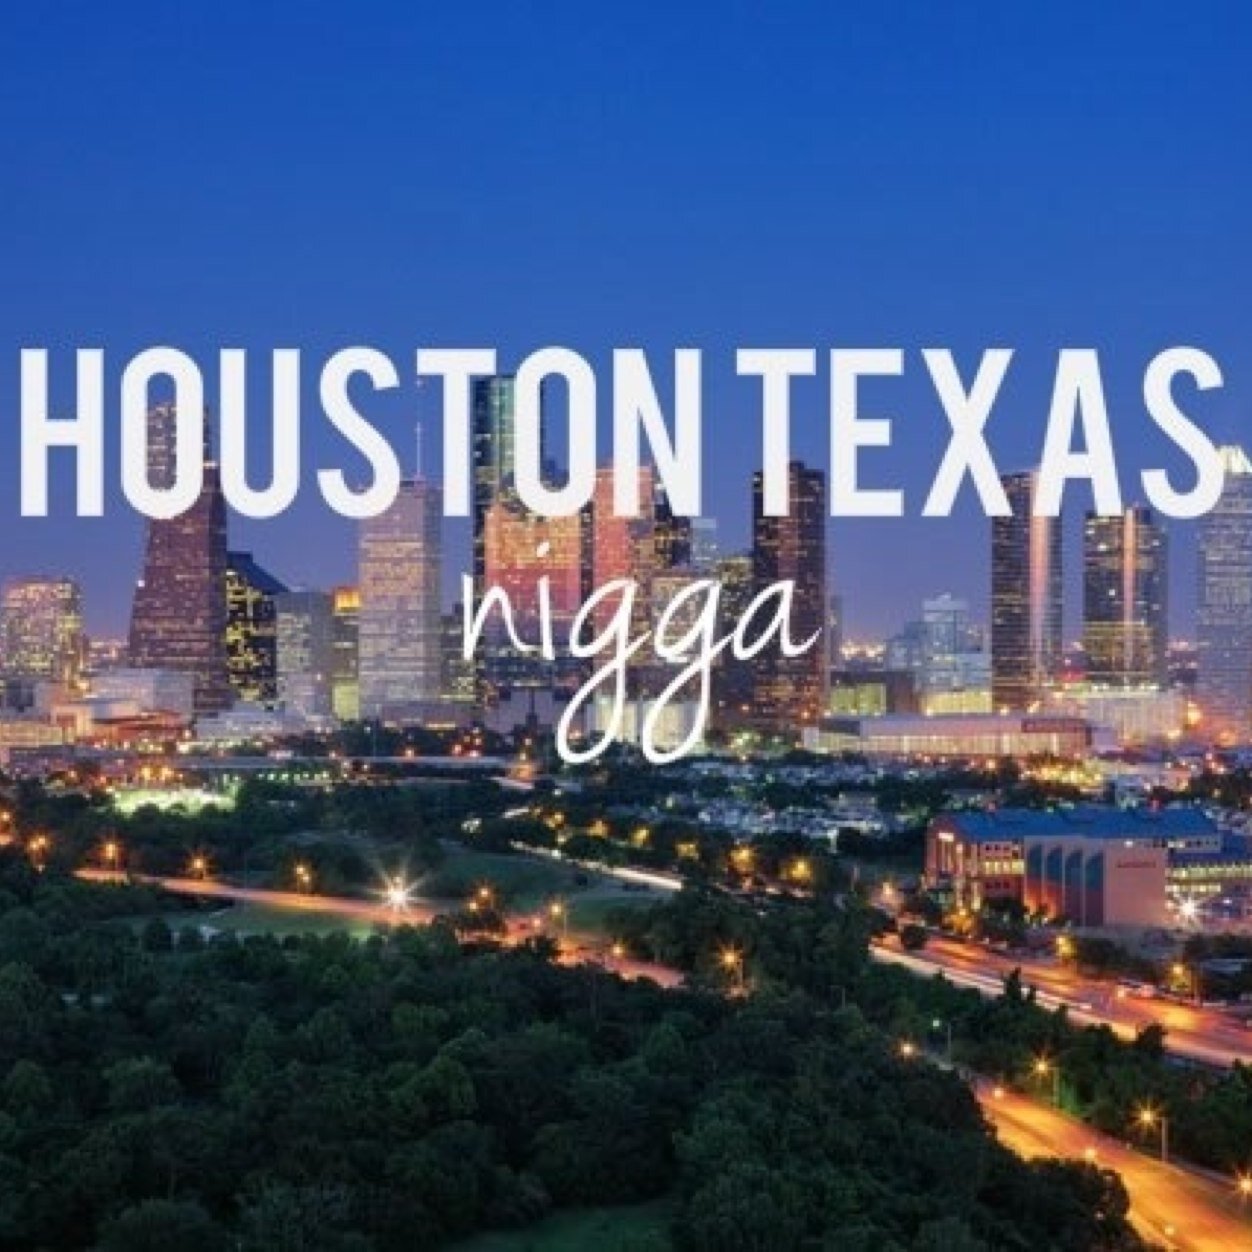 Home to the trillest. Houston news, music, trends, photos an more. All Screwstonians follow. Business - HoustonOnlyManagment@yahoo.com